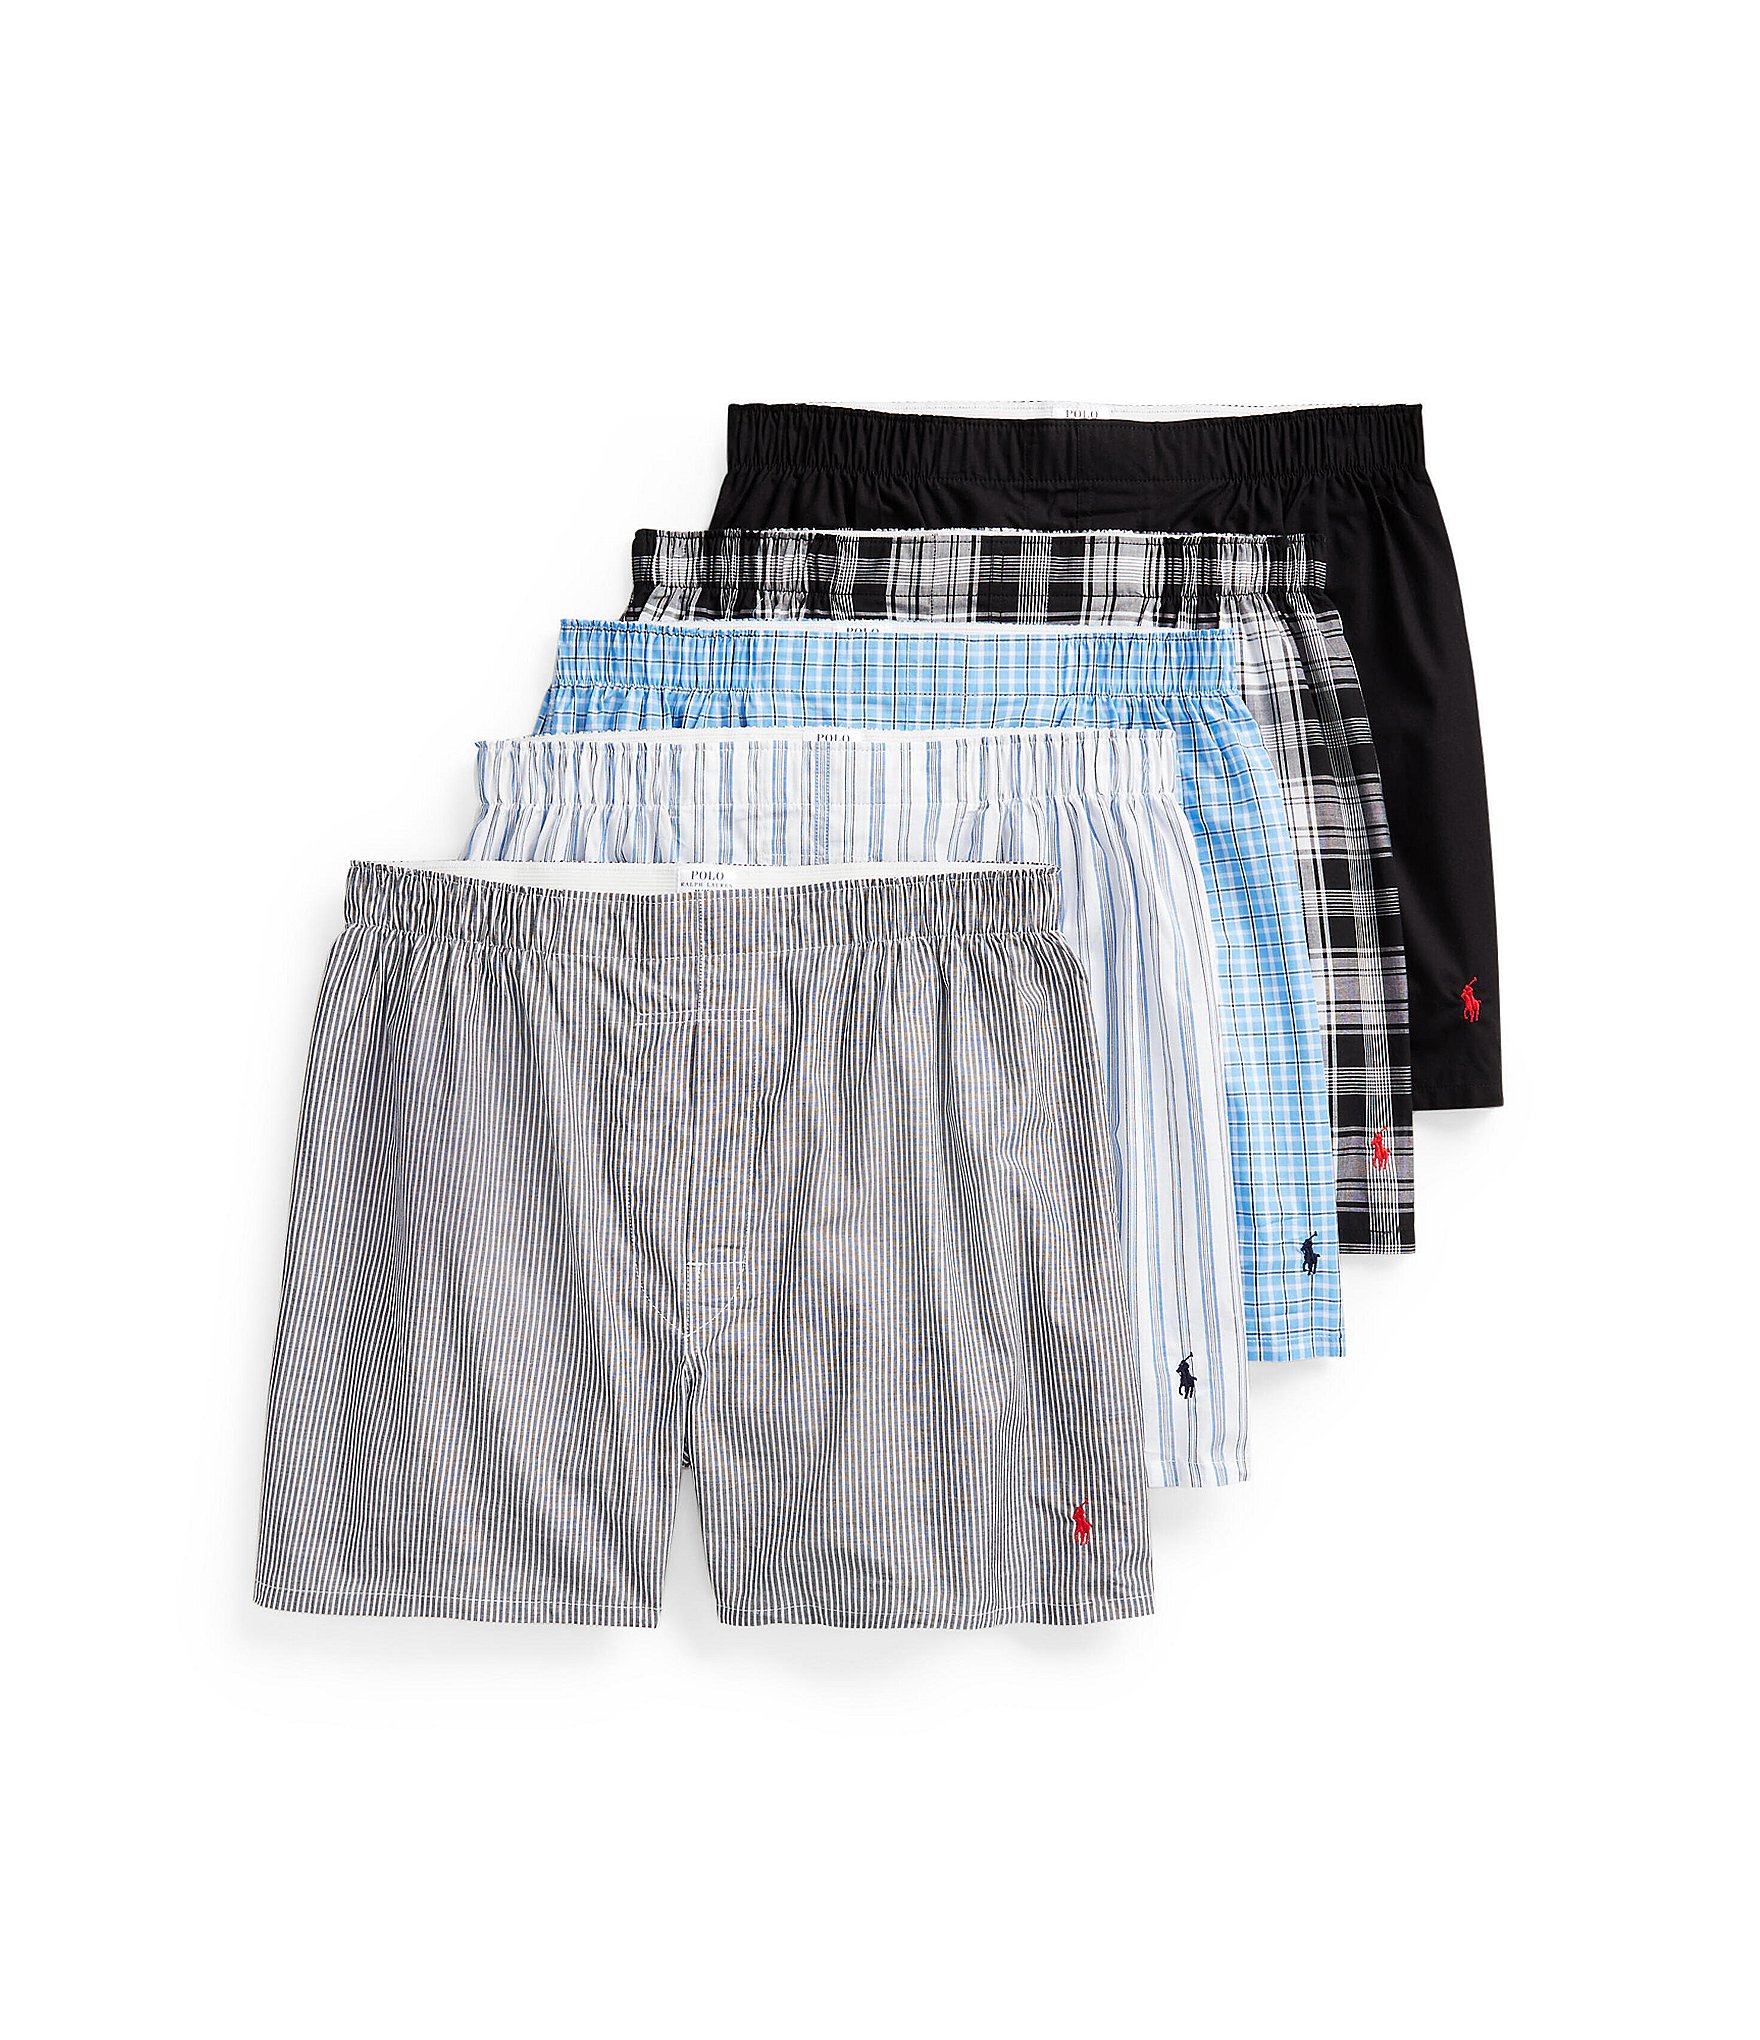 Buy Polo Ralph Lauren Men's Classic Fit w/Wicking 5-Pack Boxers